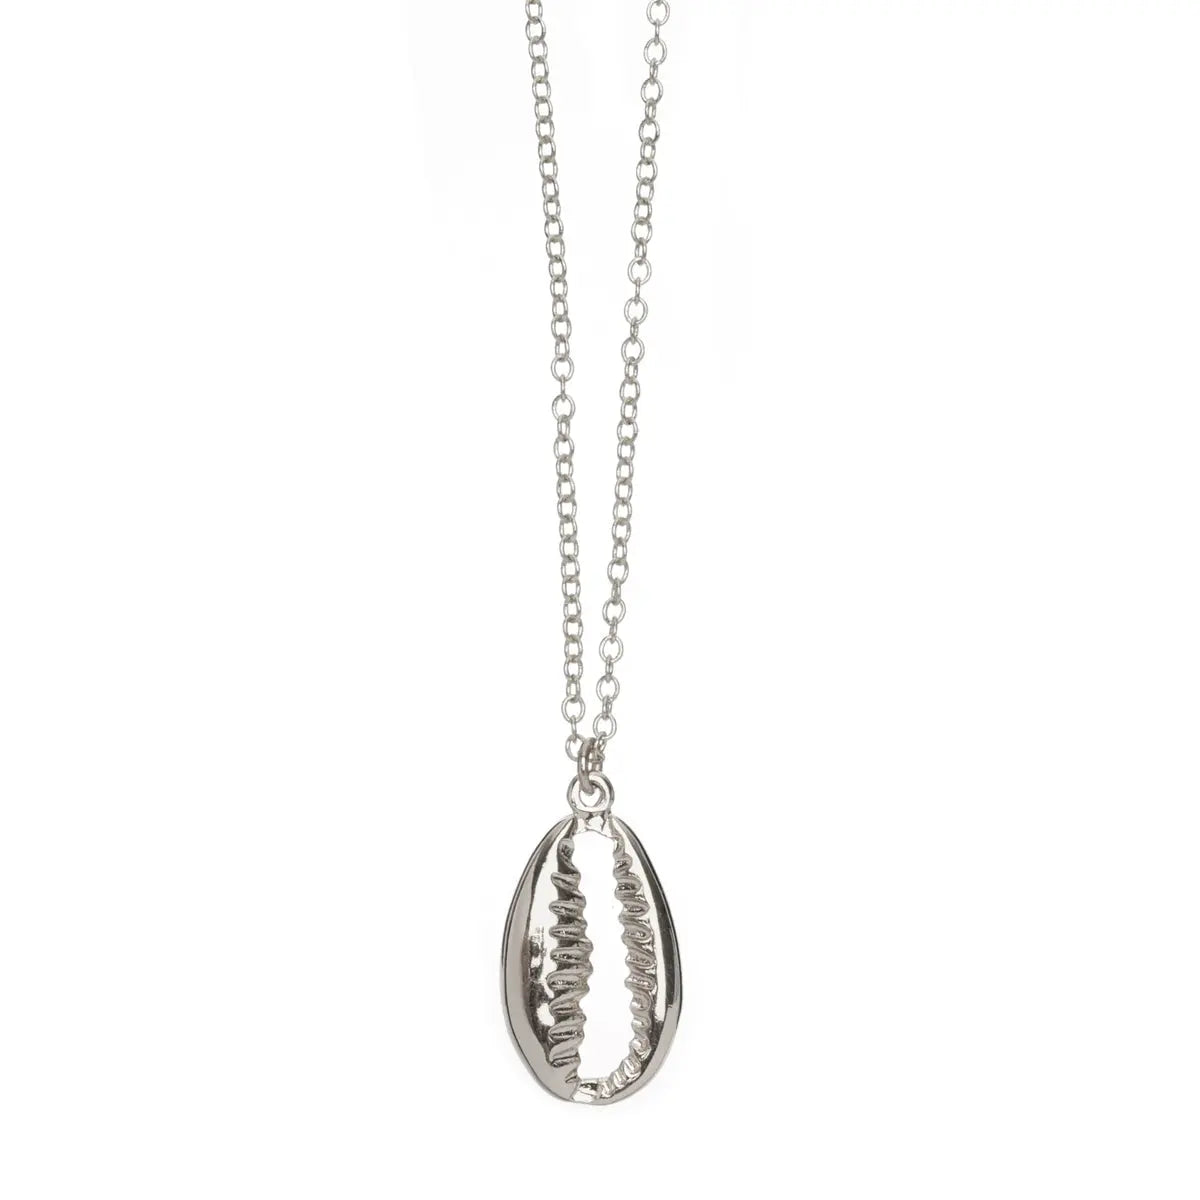 Long Necklace with Cowrie Shell Pendant Silver